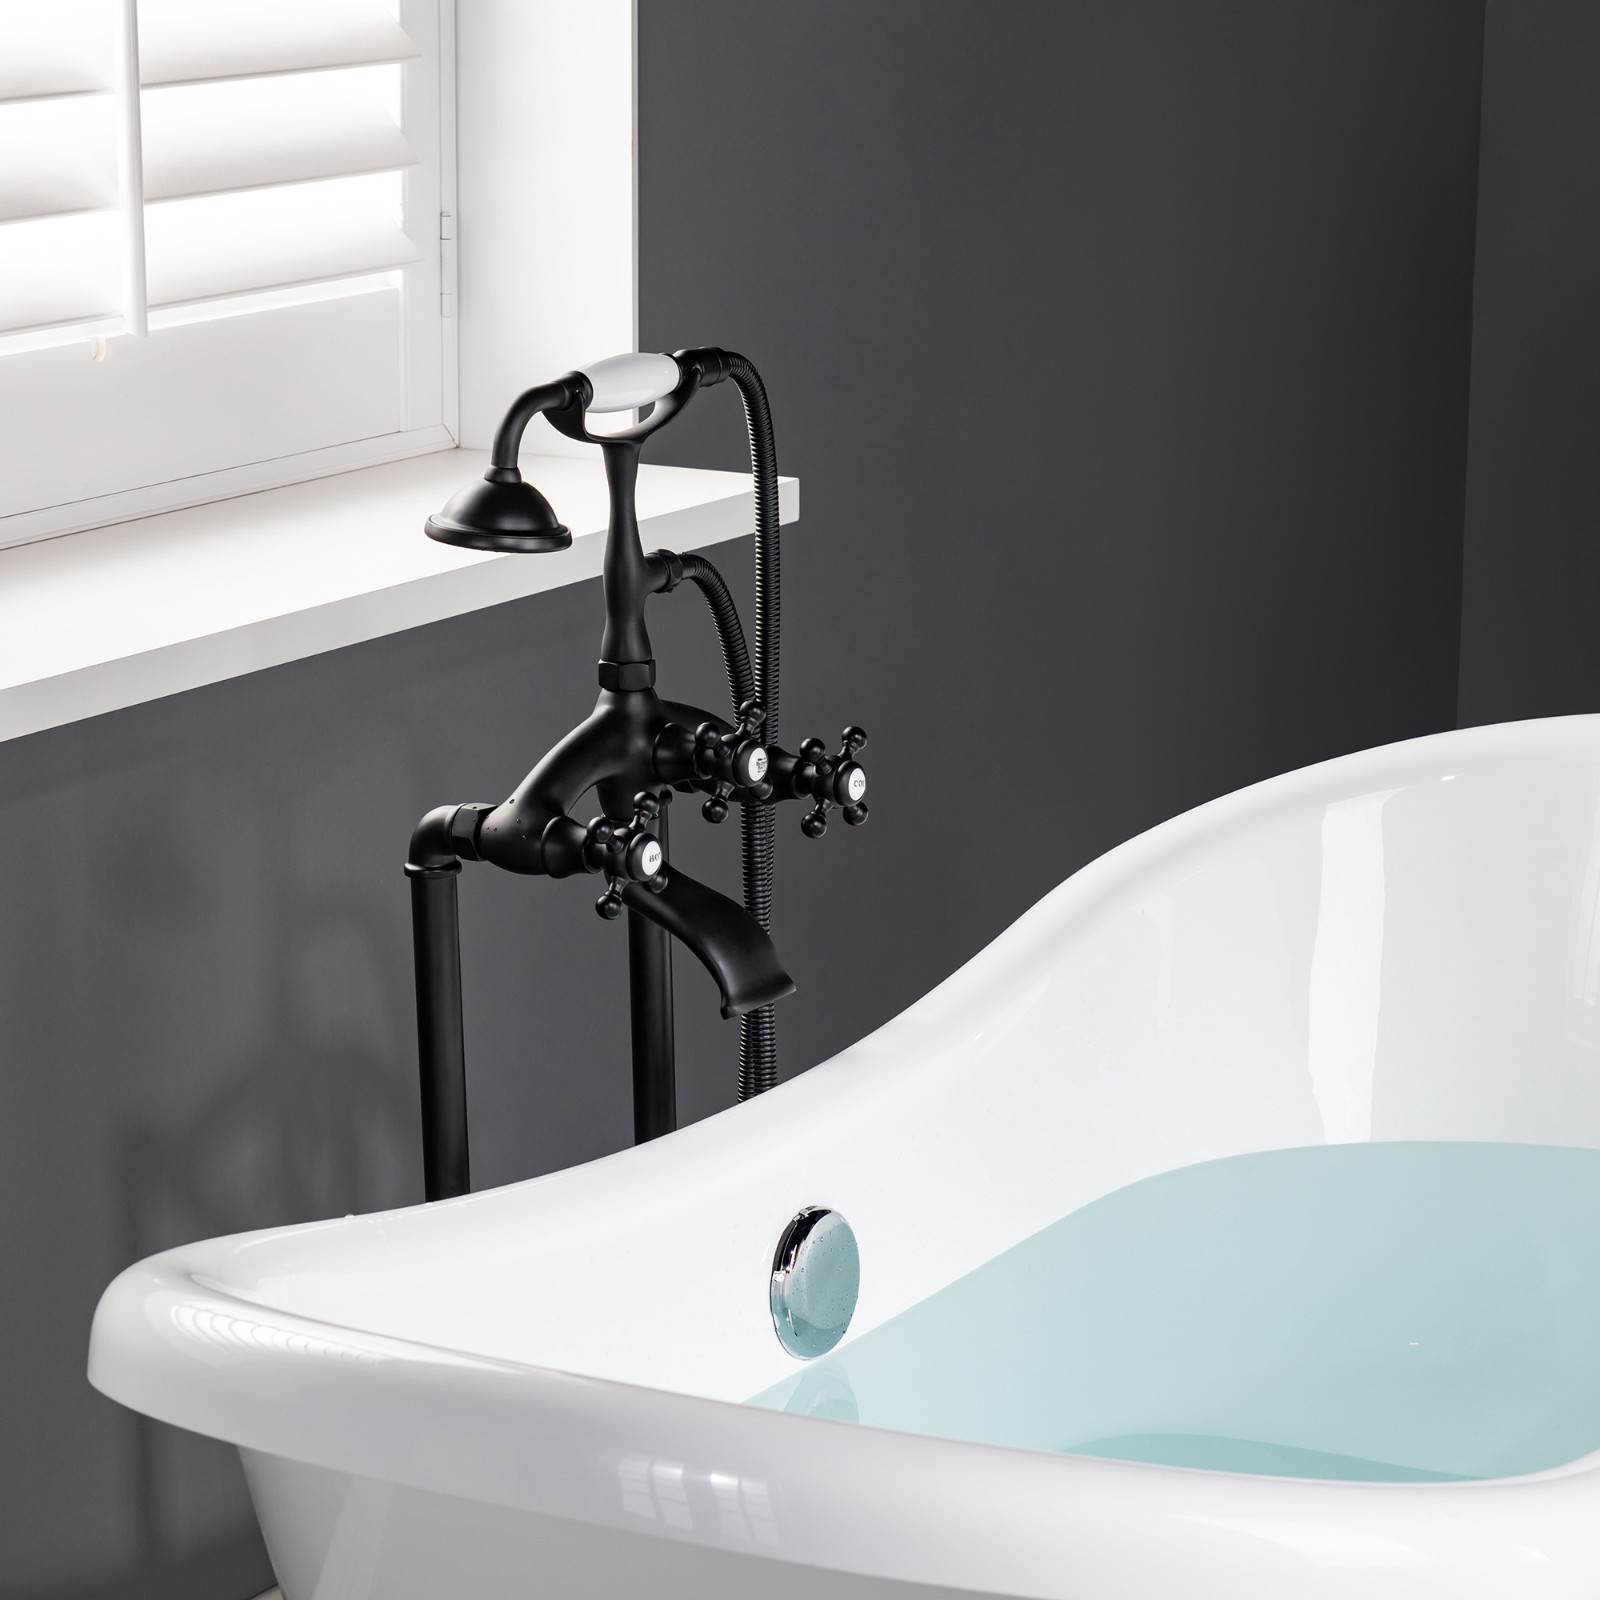  WOODBRIDGE F0020MB Freestanding Clawfoot Tub Filler Faucet with Hand Shower and Hose in Matte Black_5403